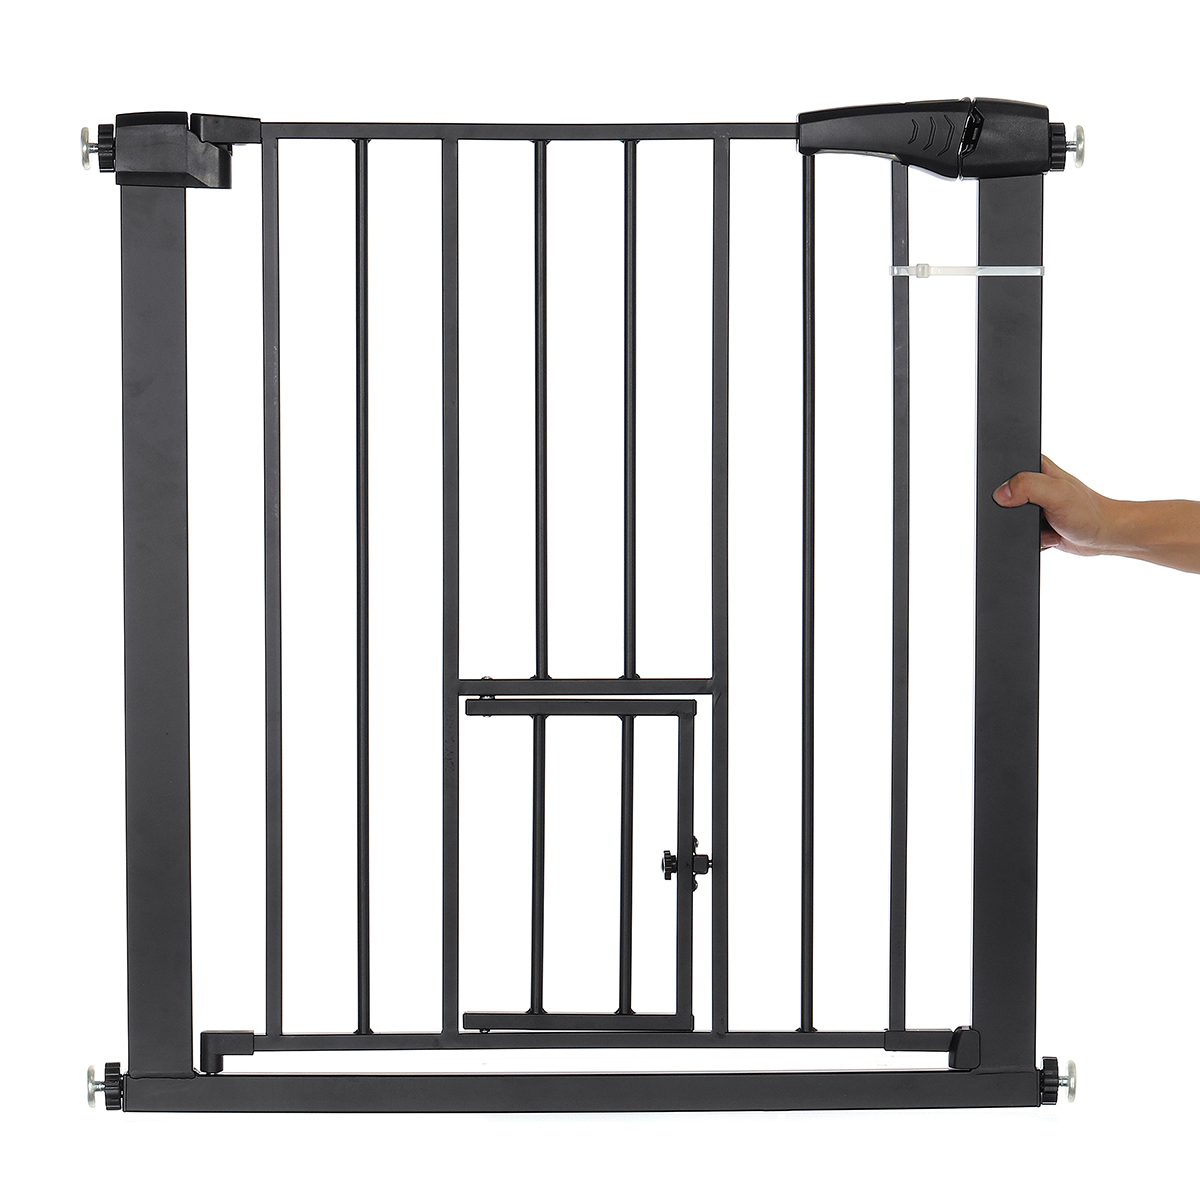 Comomy-Extra-Wide-Pet-Gate-for-Dog-Cat-Animal-Baby-Gate-Fence-Pens-with-Swing-Door-Kids-Play-Gate-30-1900433-7